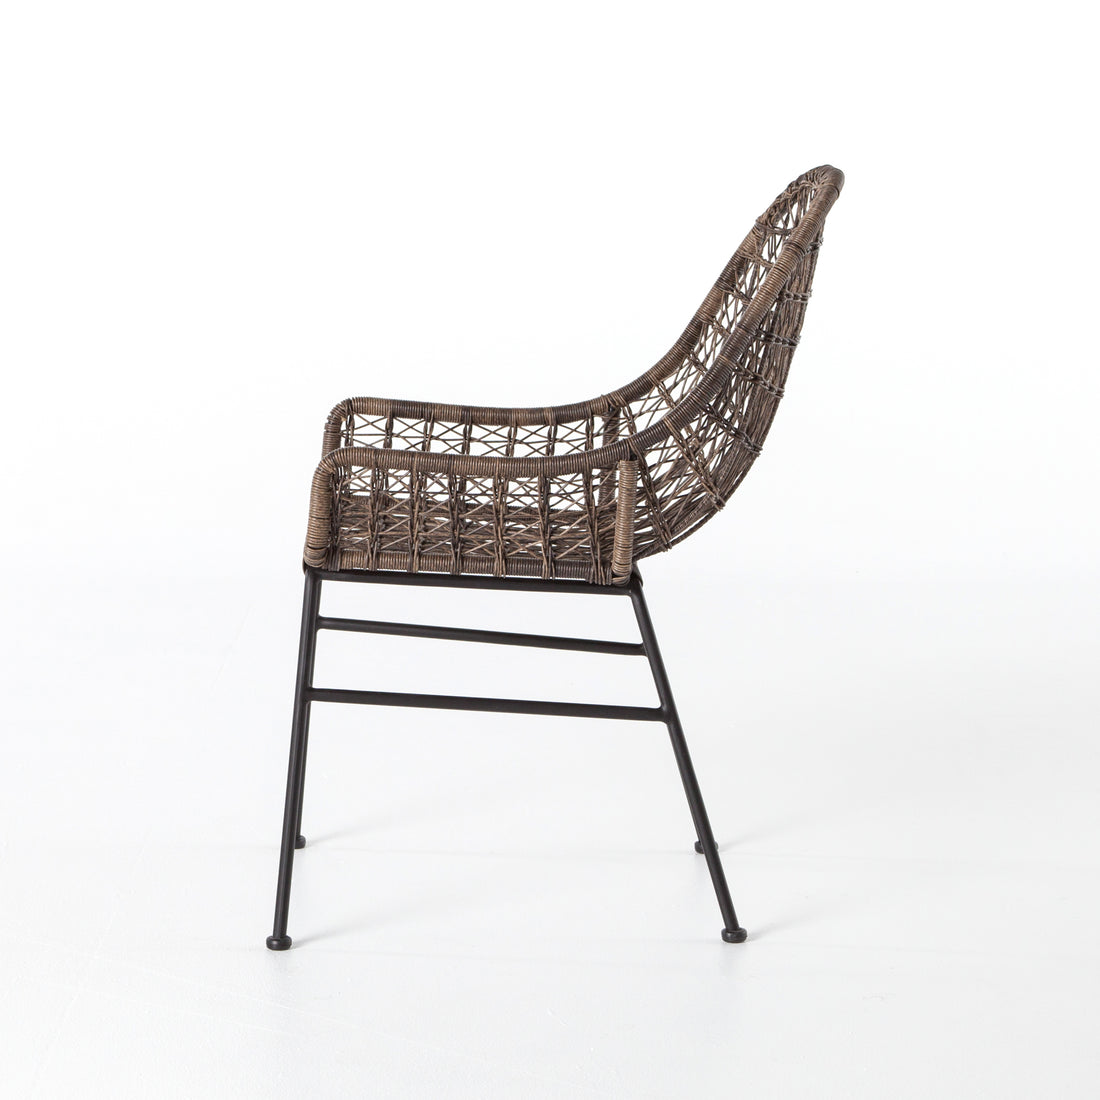 Malibu Outdoor Woven Dining Chair